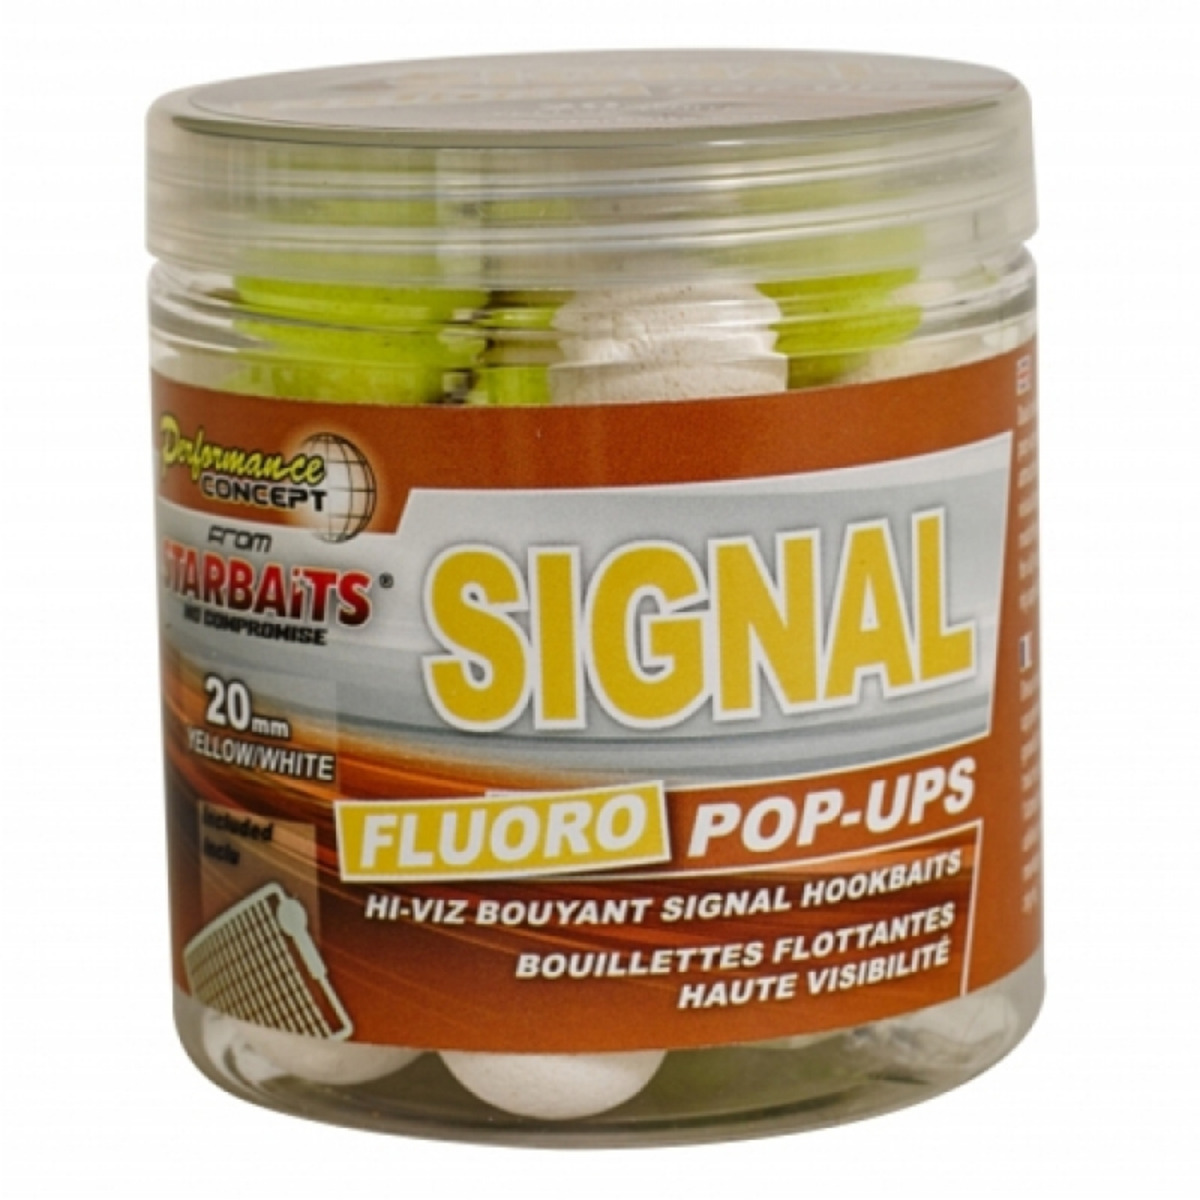 Starbaits Concept Fluo Pop Ups Signal - 20 mm  - 80 g